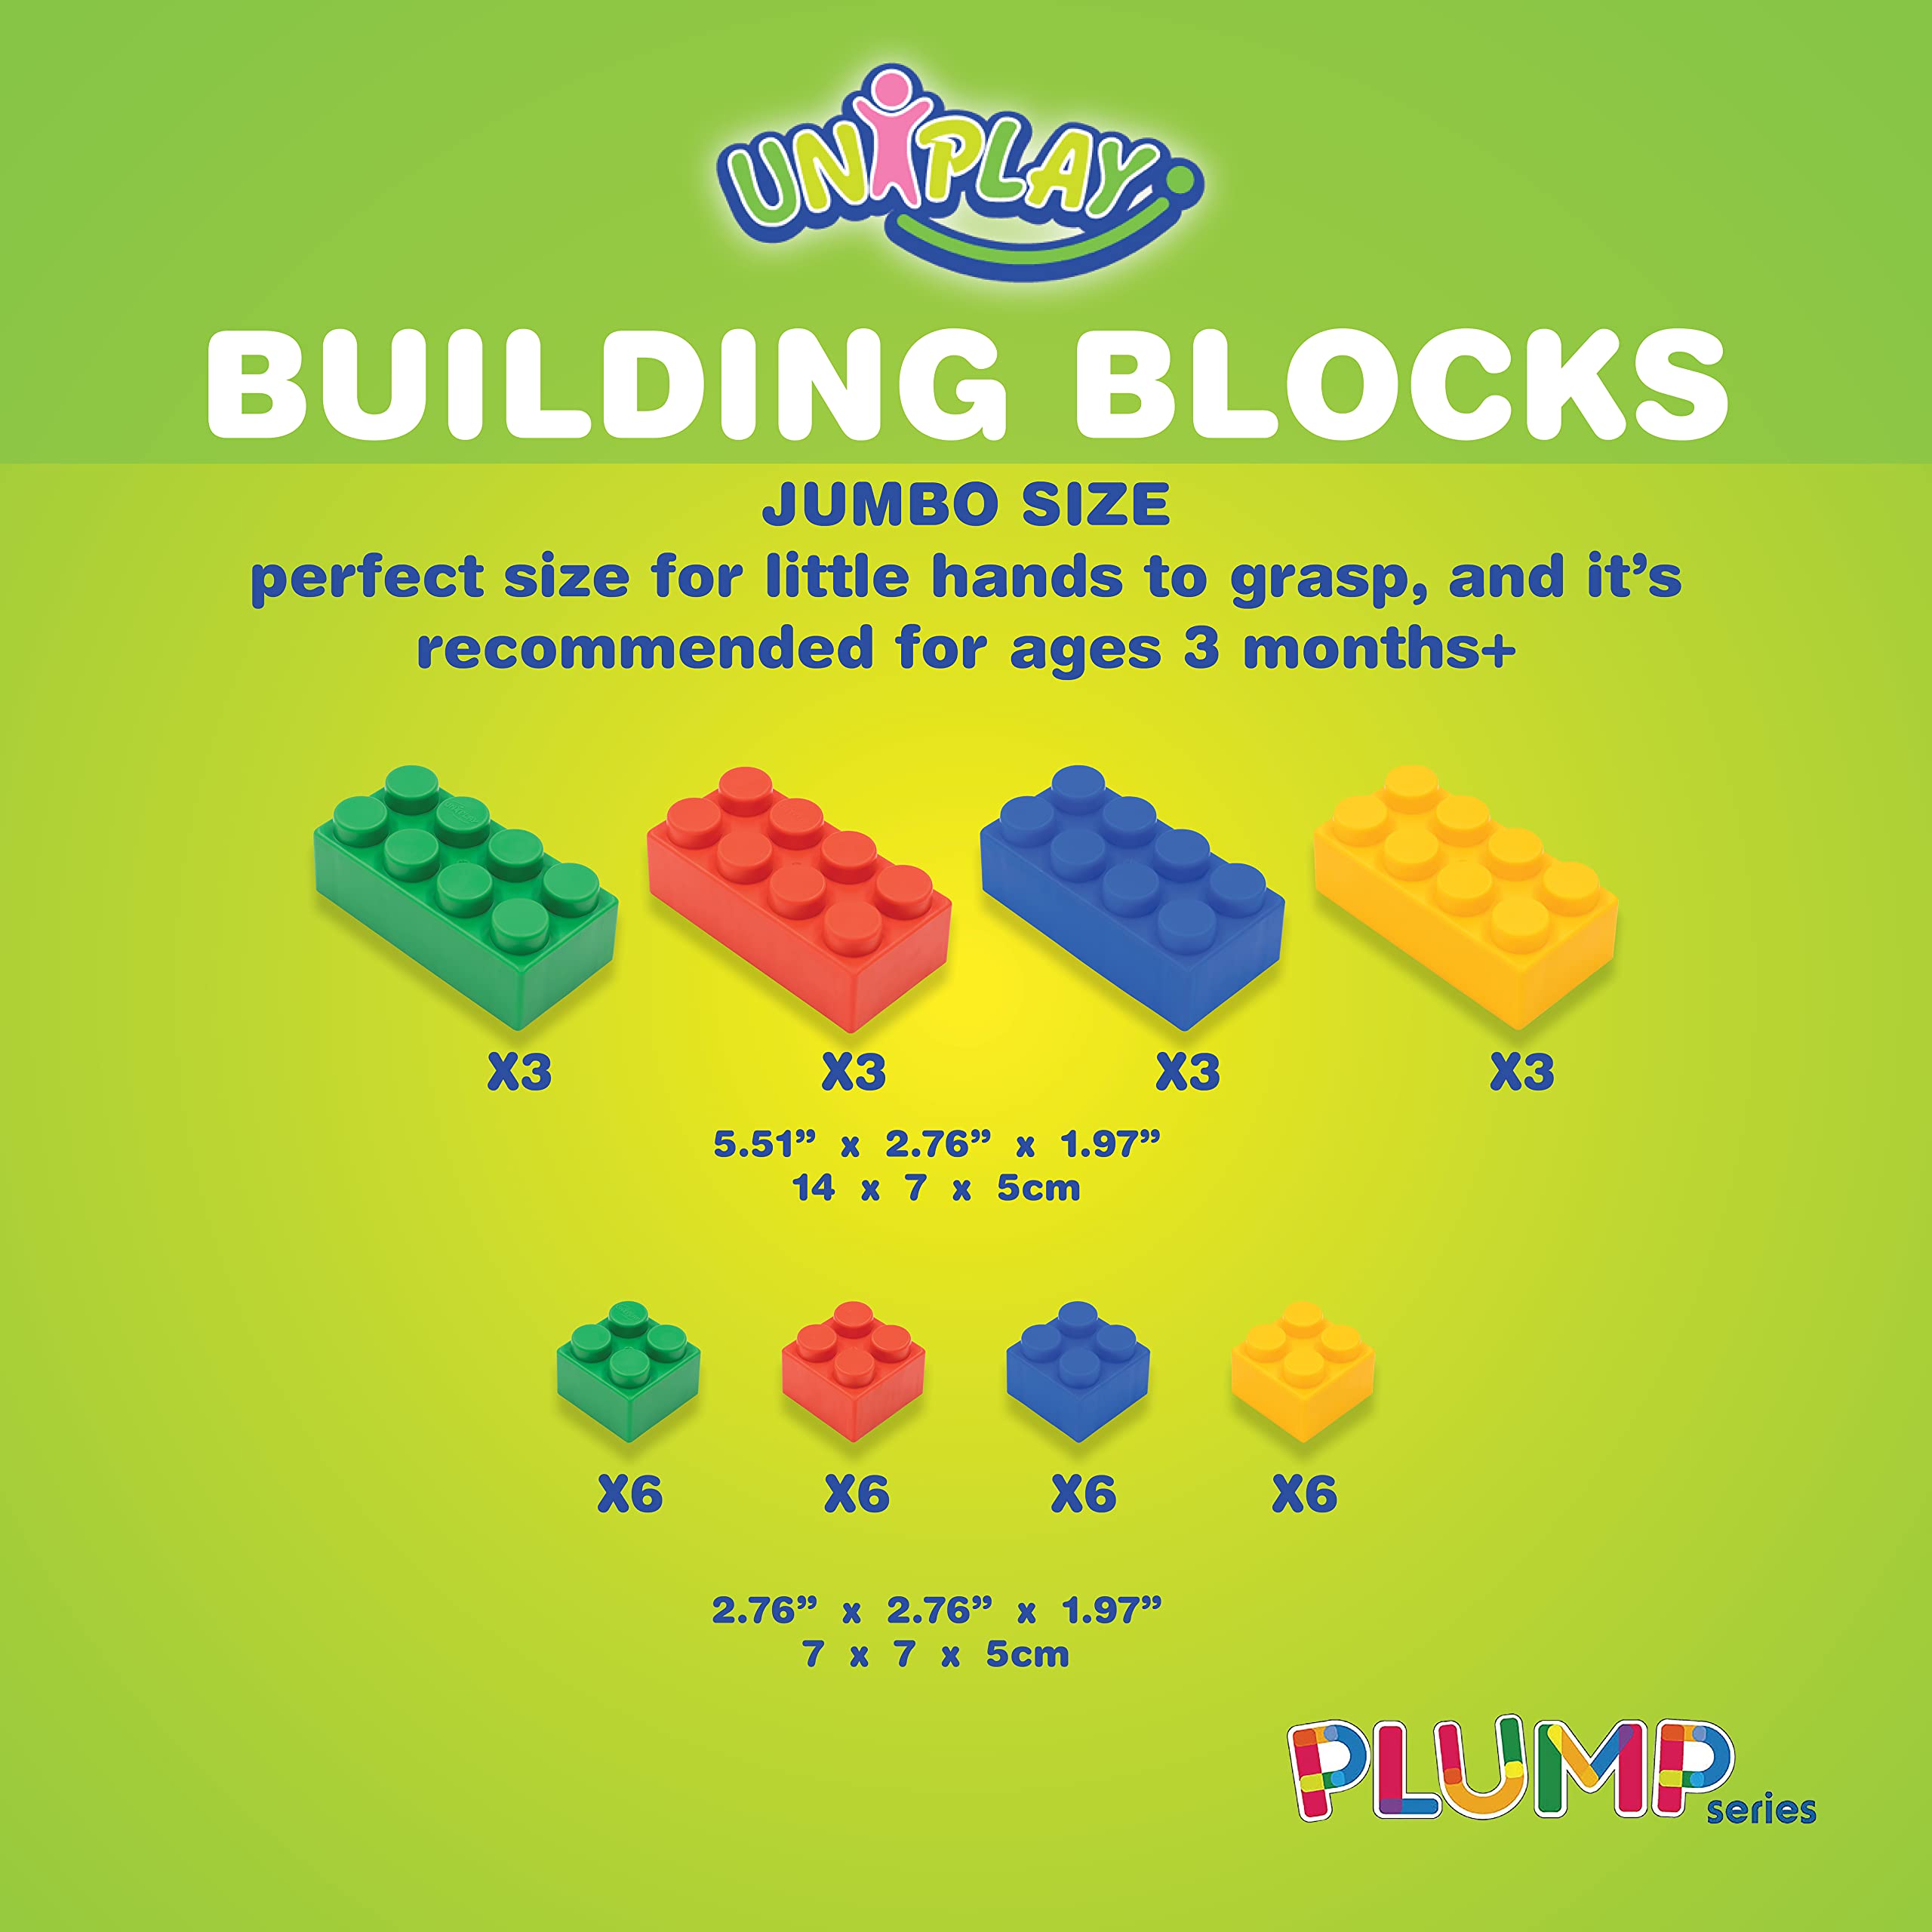 UNiPLAY Plump Soft Building Blocks — Jumbo Multicolor Stacking Blocks for Cognitive Development and Educational Games for Ages 3 Months and Up (36-Piece Set)